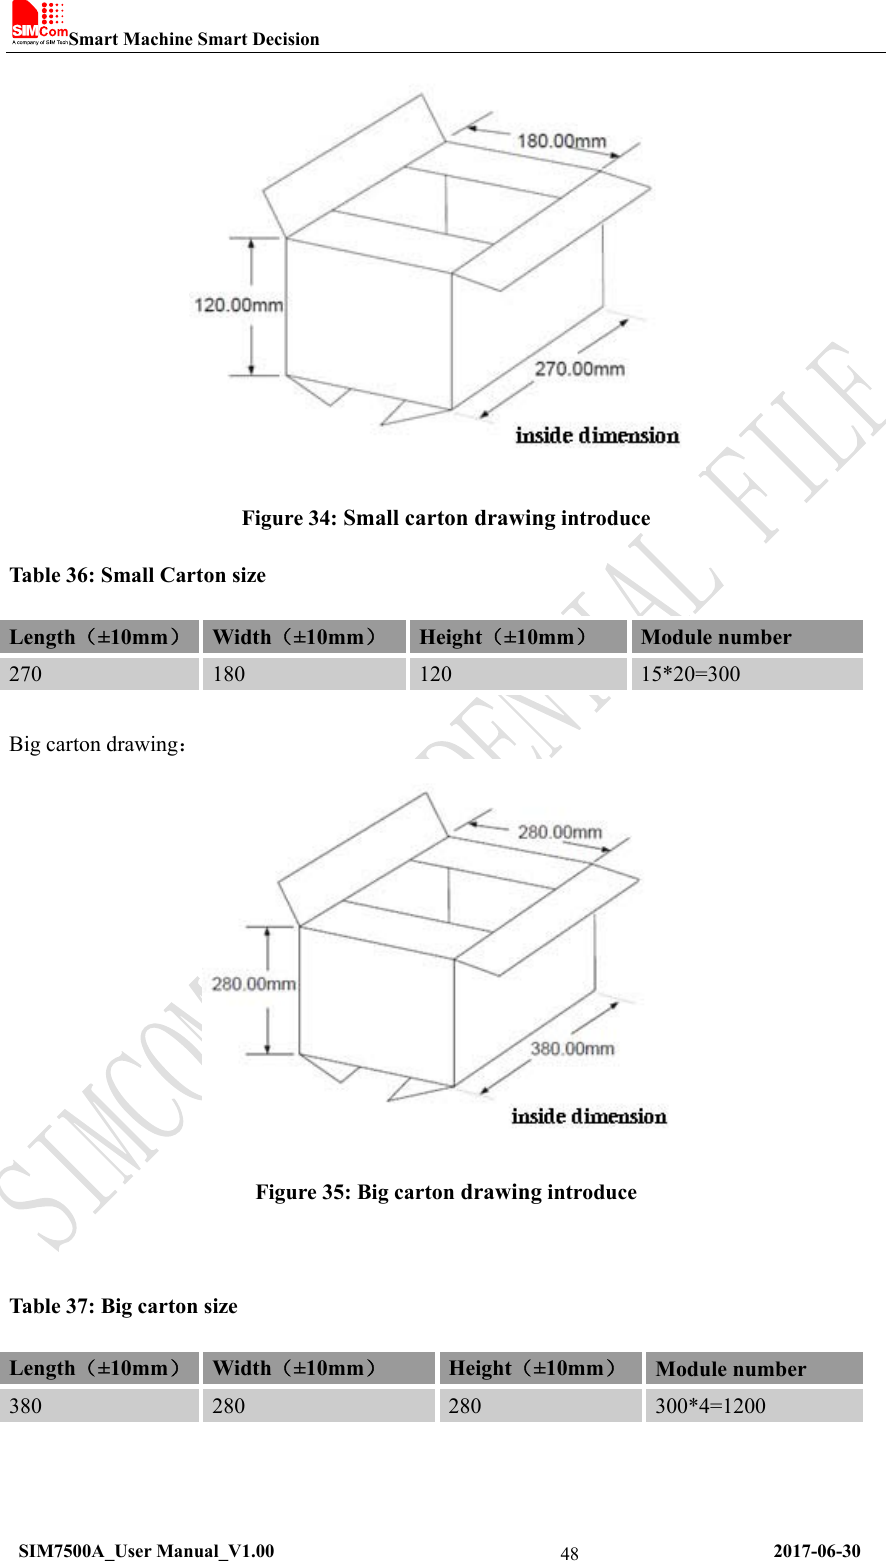 Smart Machine Smart Decision   SIM7500A_User Manual_V1.00                                                      2017-06-30 48 Figure 34: Small carton drawing introduce Table 36: Small Carton size Length（±10mm） Width（±10mm） Height（±10mm） Module number 270  180  120  15*20=300  Big carton drawing：  Figure 35: Big carton drawing introduce  Table 37: Big carton size Length（±10mm） Width（±10mm） Height（±10mm）Module number 380  280  280  300*4=1200   